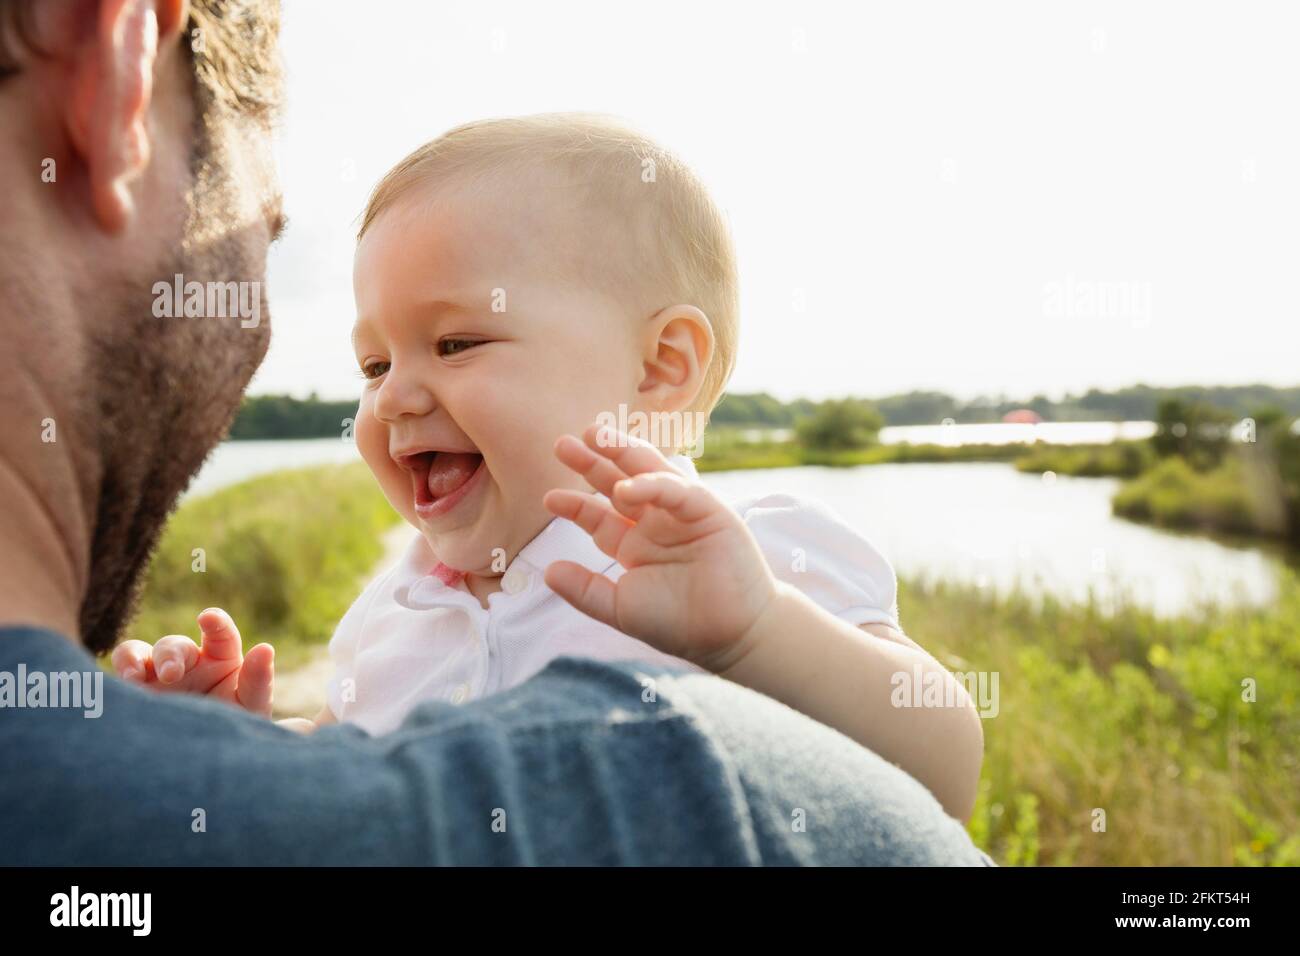 Over shoulder view of mid adult man carrying baby daughter on riverside Stock Photo